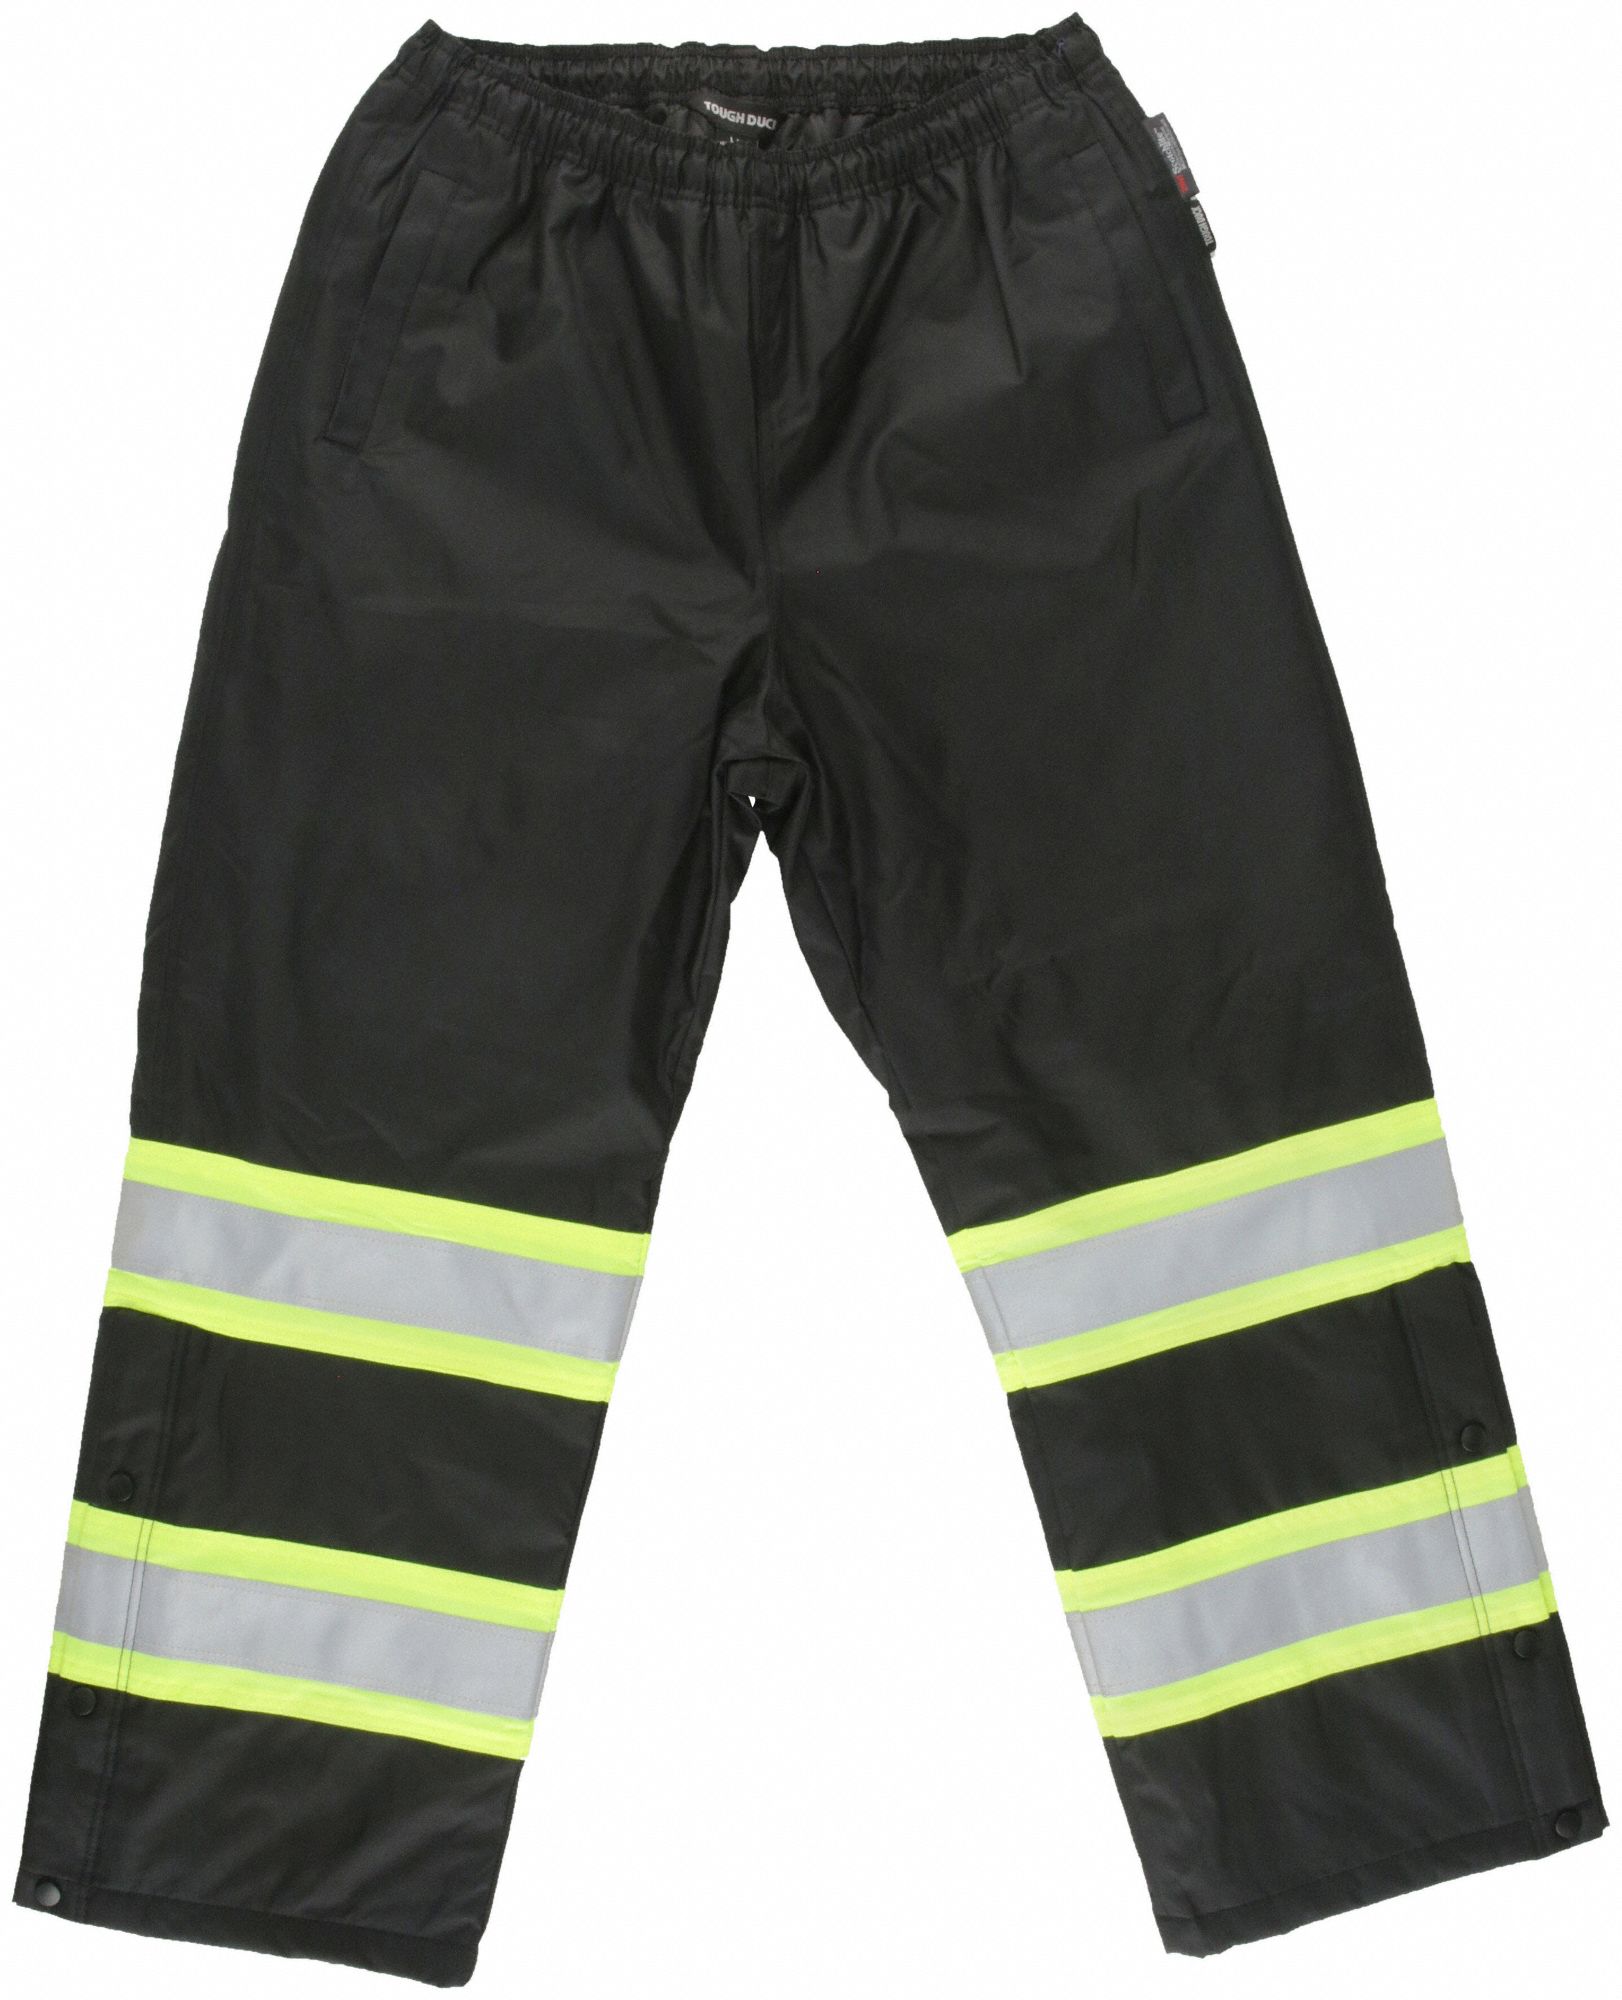 High Visibility Safety Pants